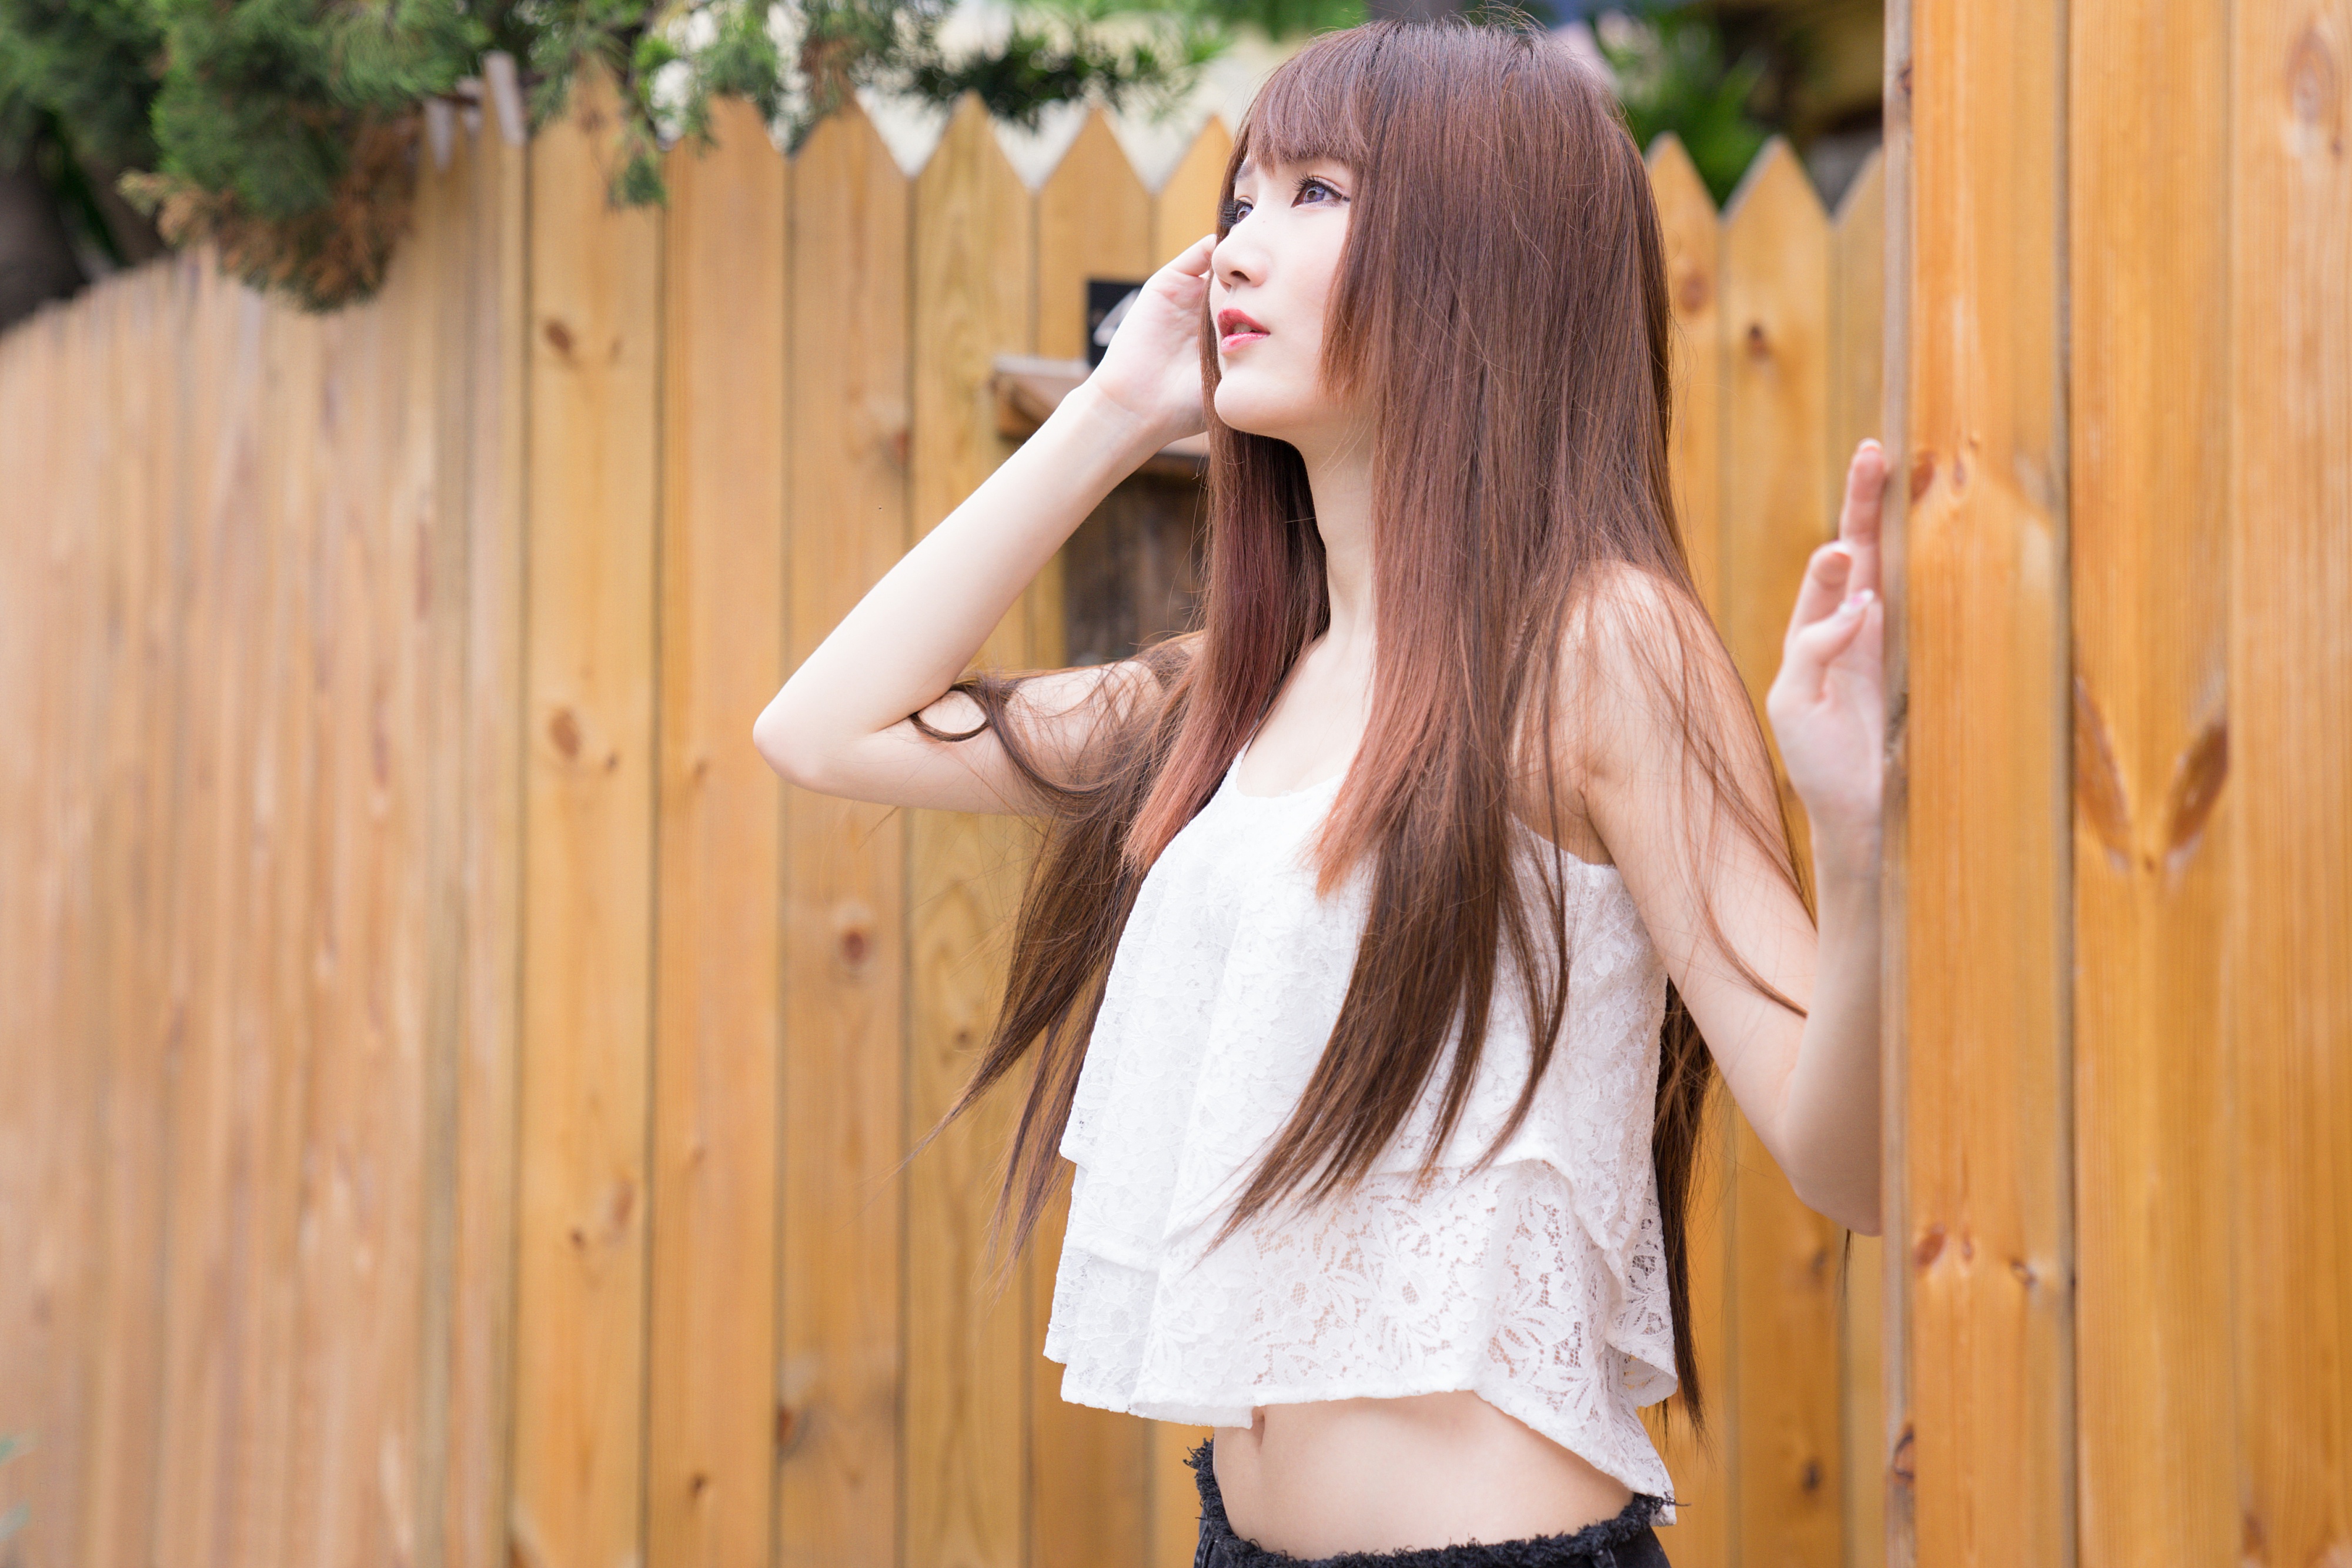 Asian Women Model Long Hair Brunette White Tops Navels Looking Into The Distance Wood Fence 4000x2667